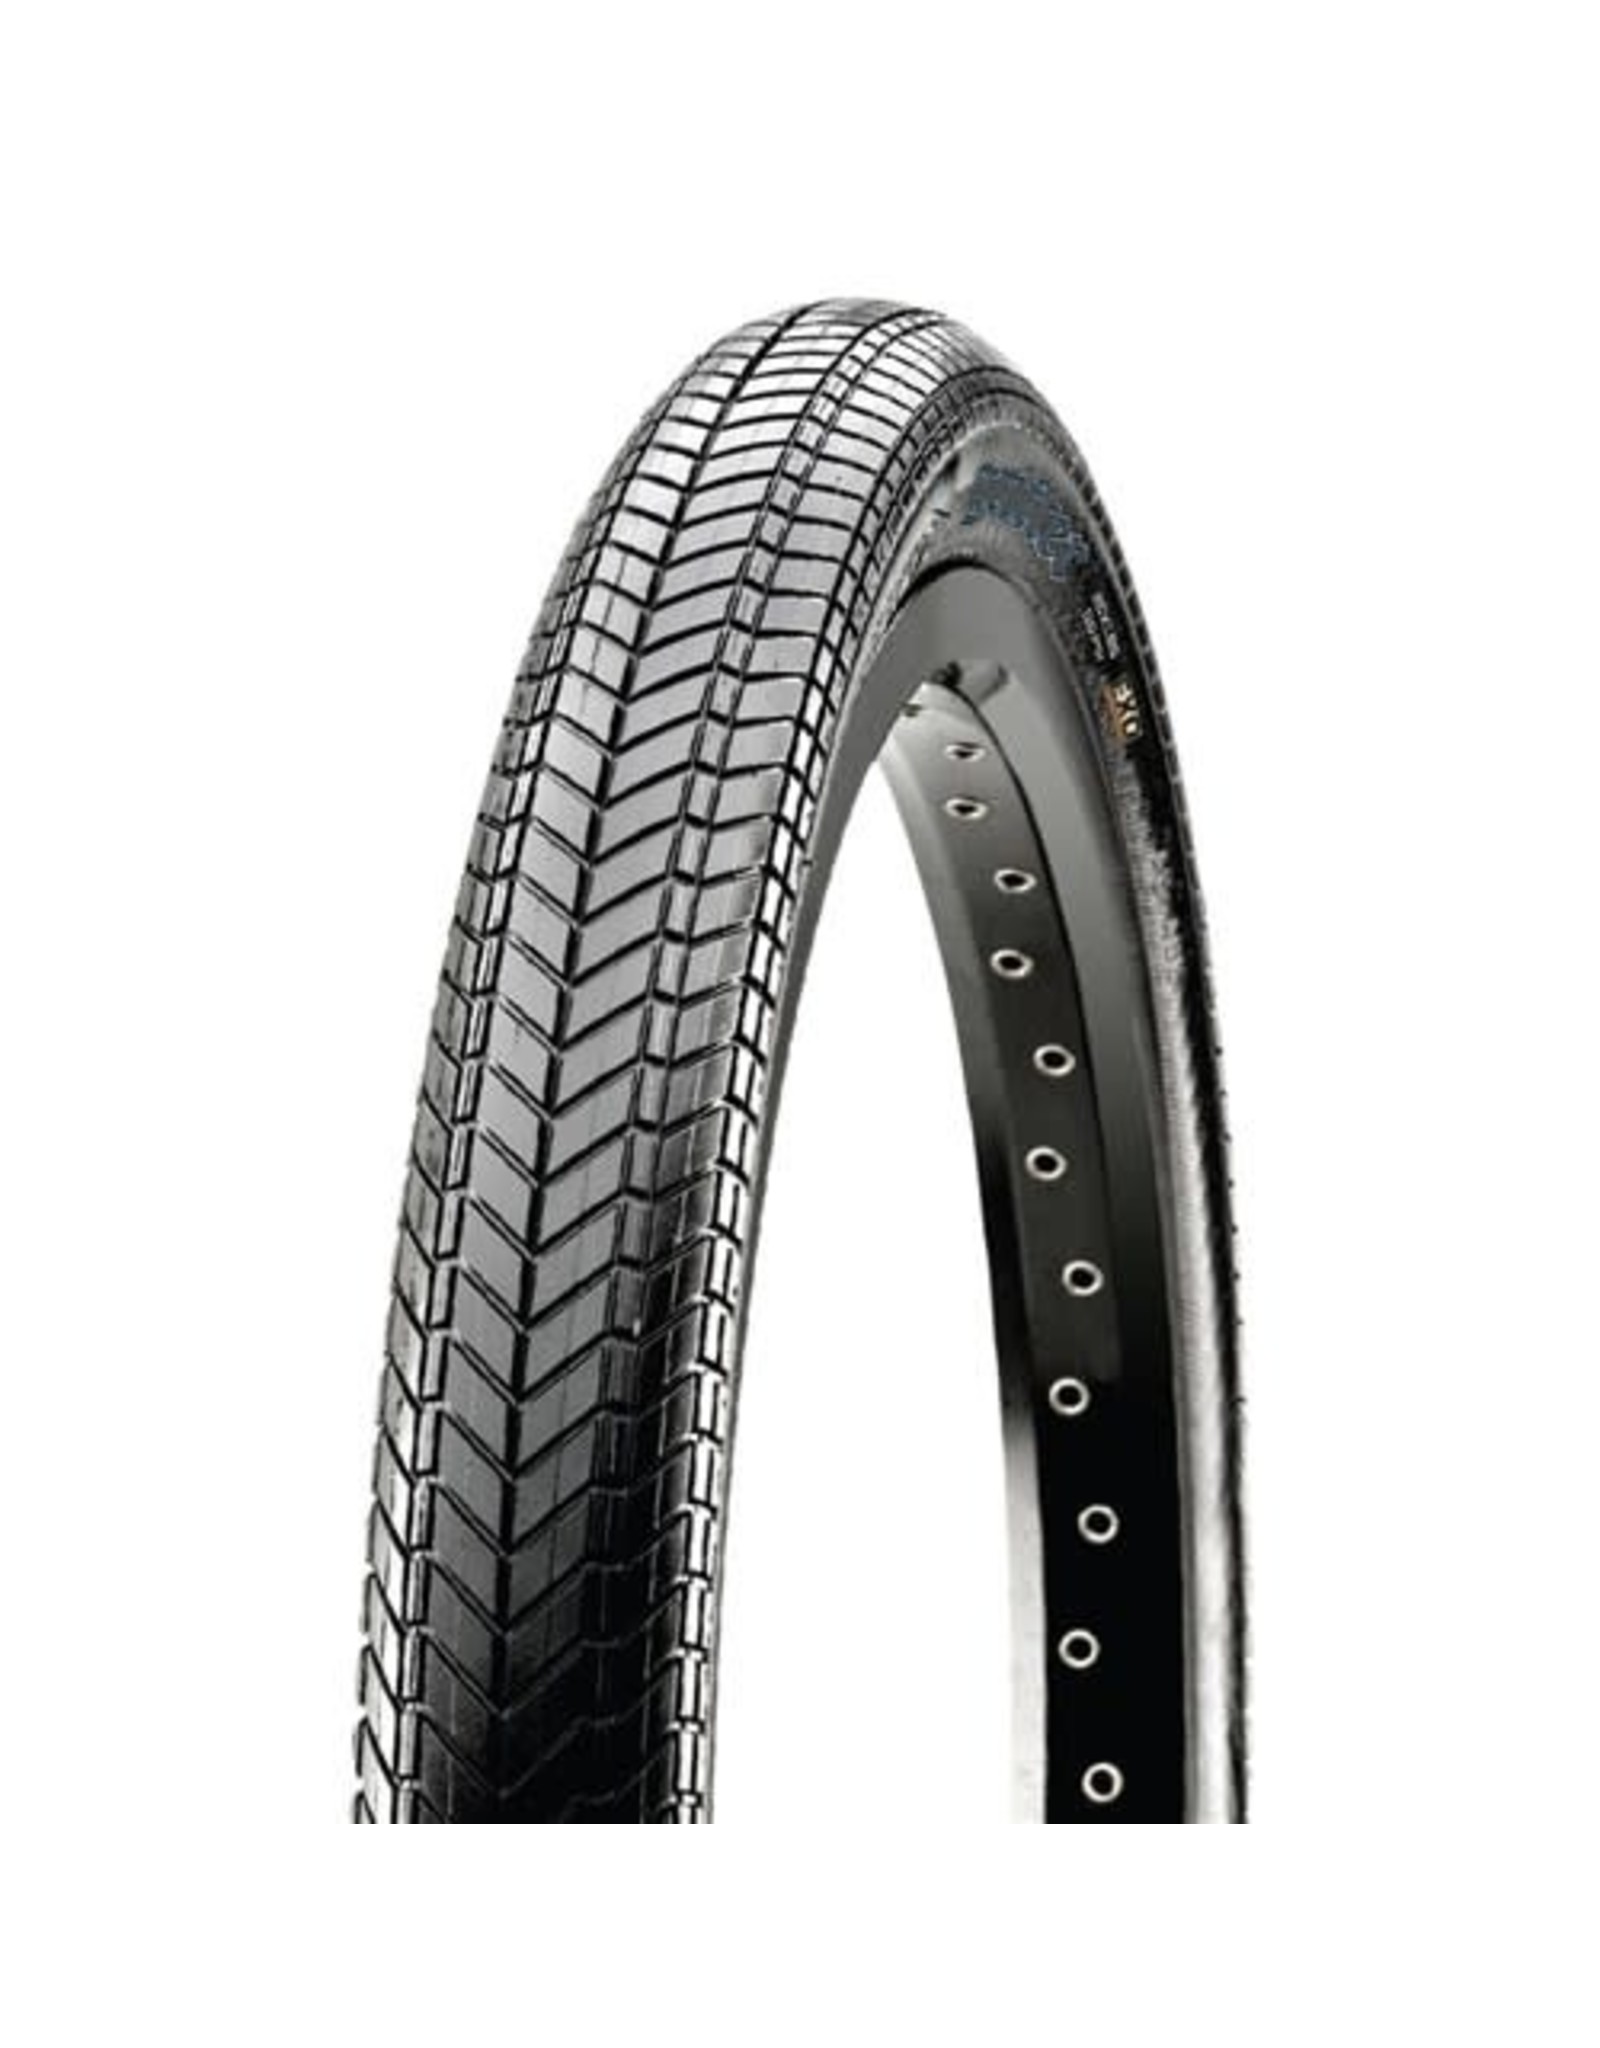 MAXXIS MAXXIS GRIFTER 20 X 2.30” EXO FOLD 120TPI TYRE